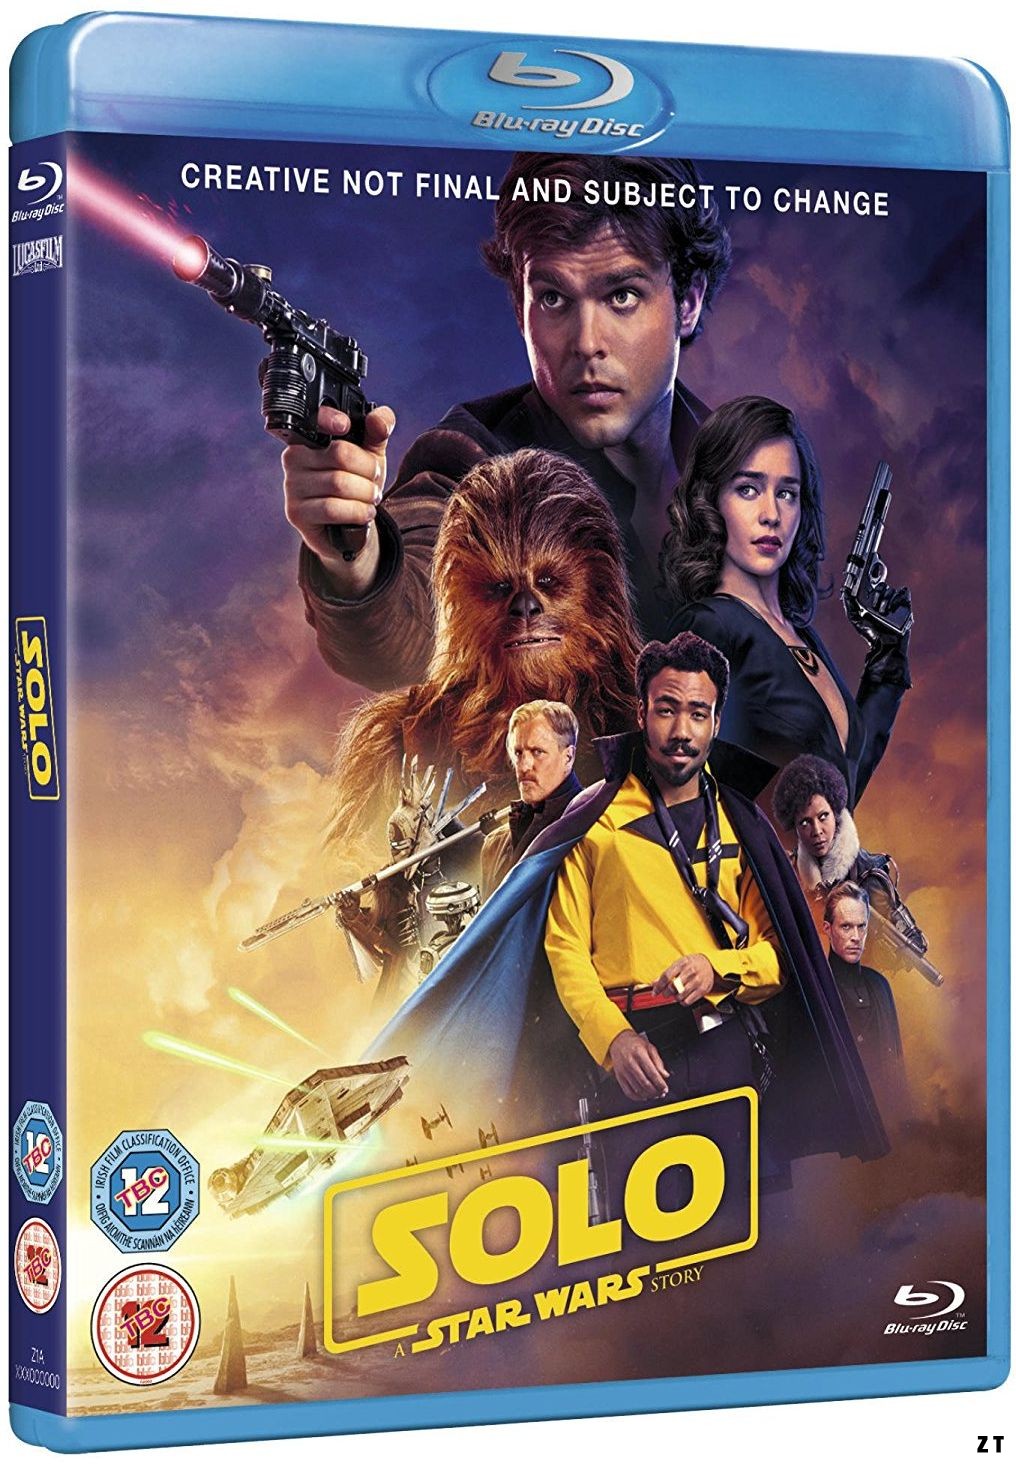 Solo: A Star Wars Story Blu-Ray 1080p MULTI